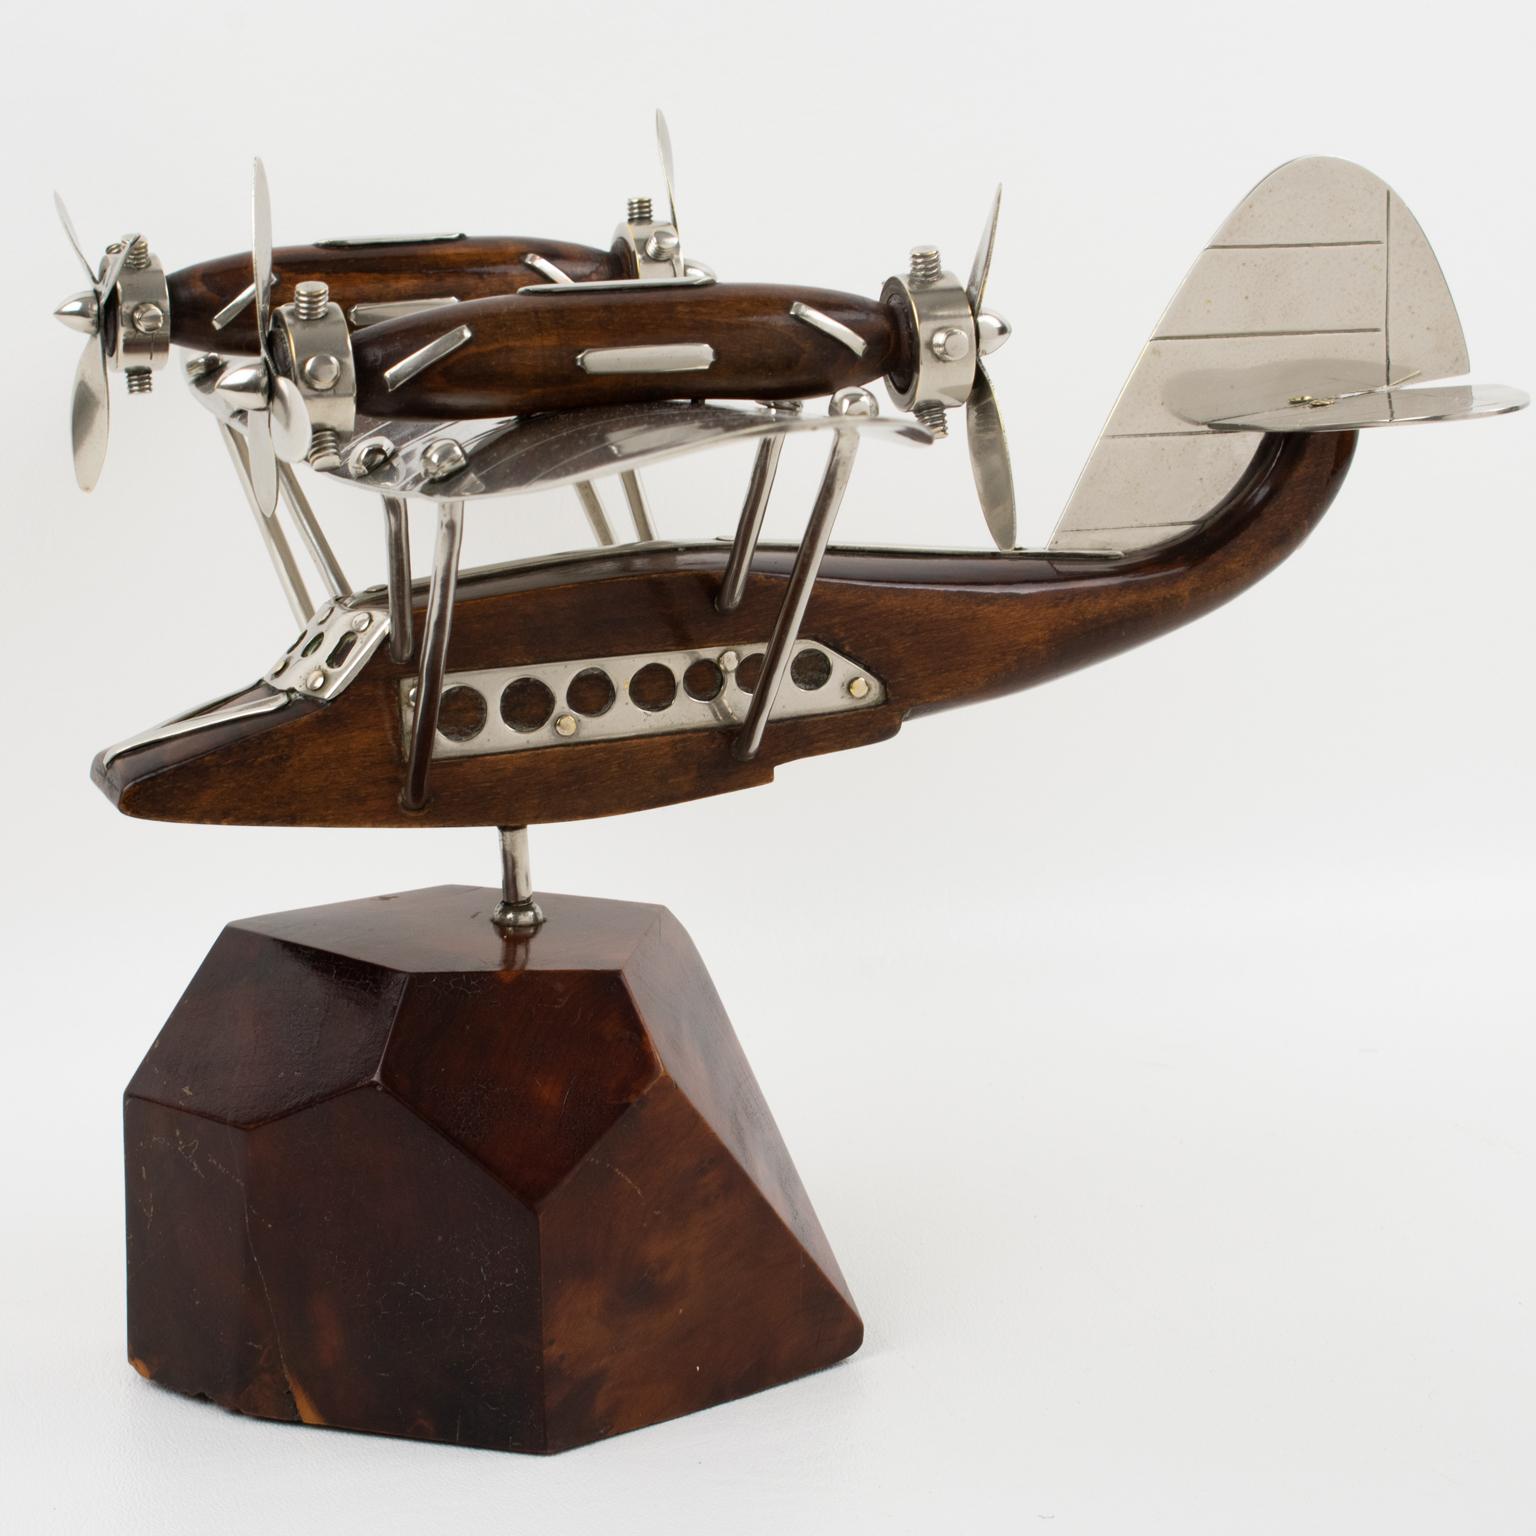 French Art Deco Wood and Chrome Airplane SeaPlane Aviation Model, 1940s For Sale 4